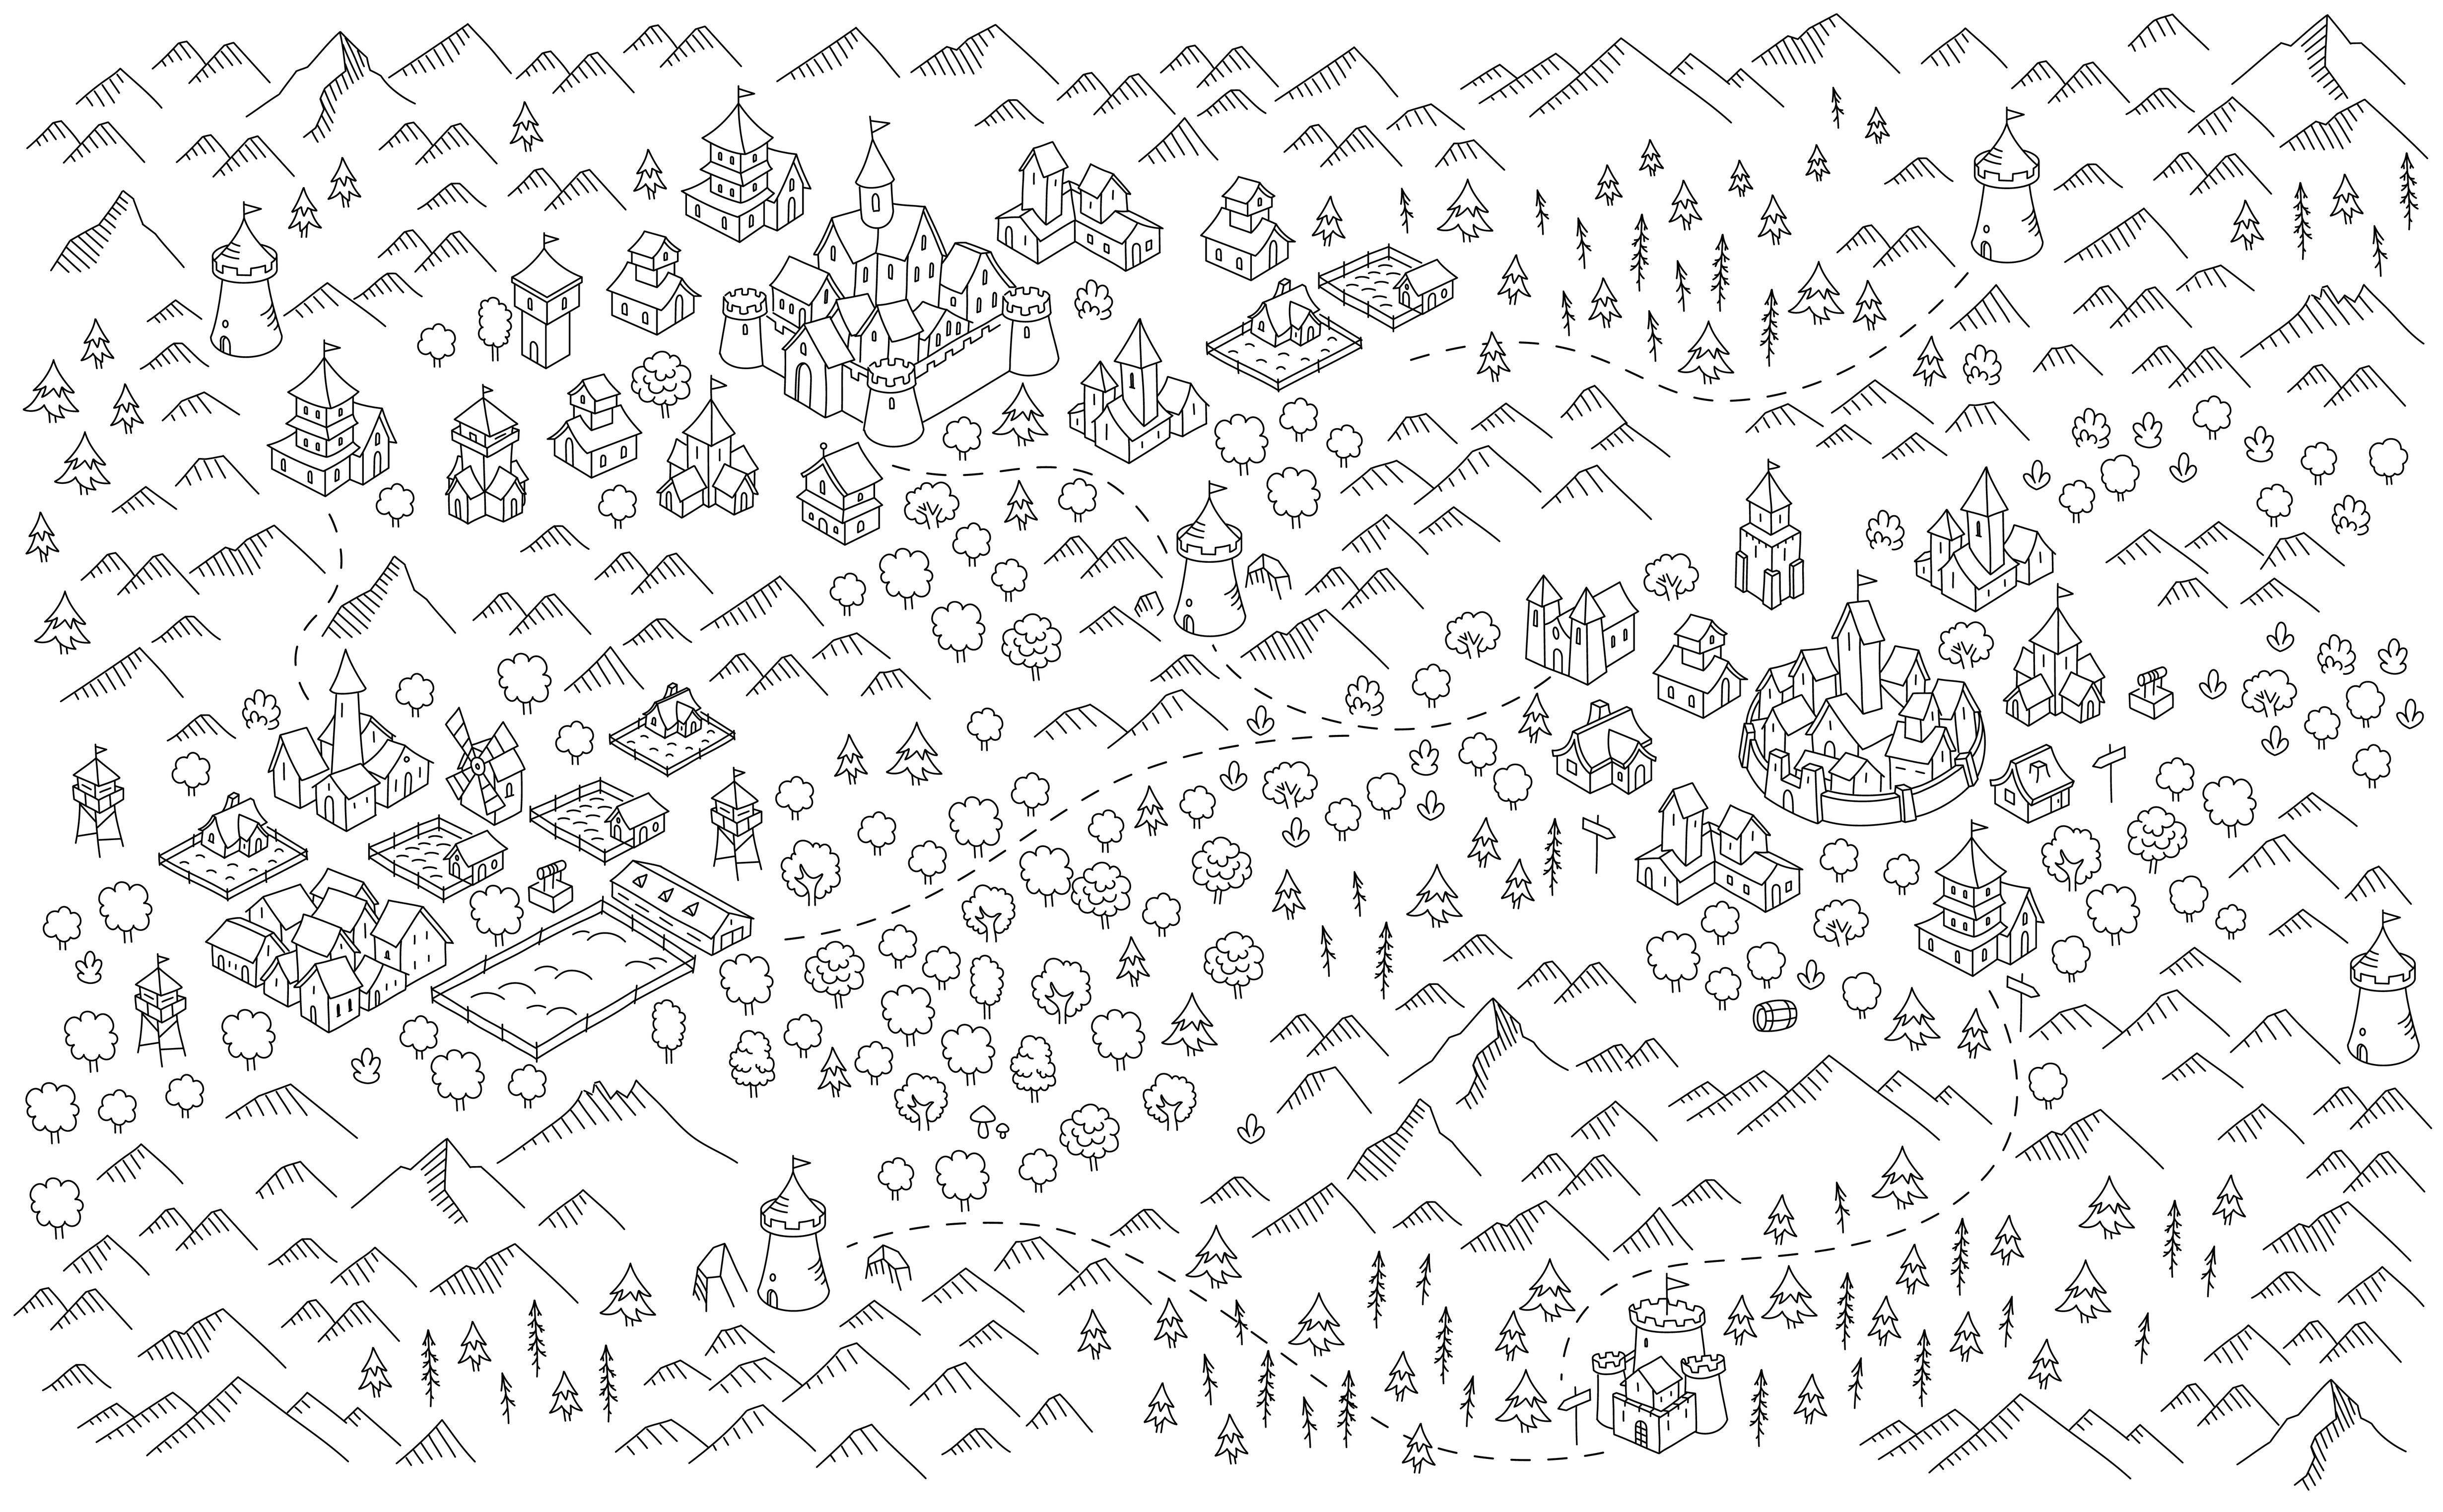 black and white simple map with tree and village icons